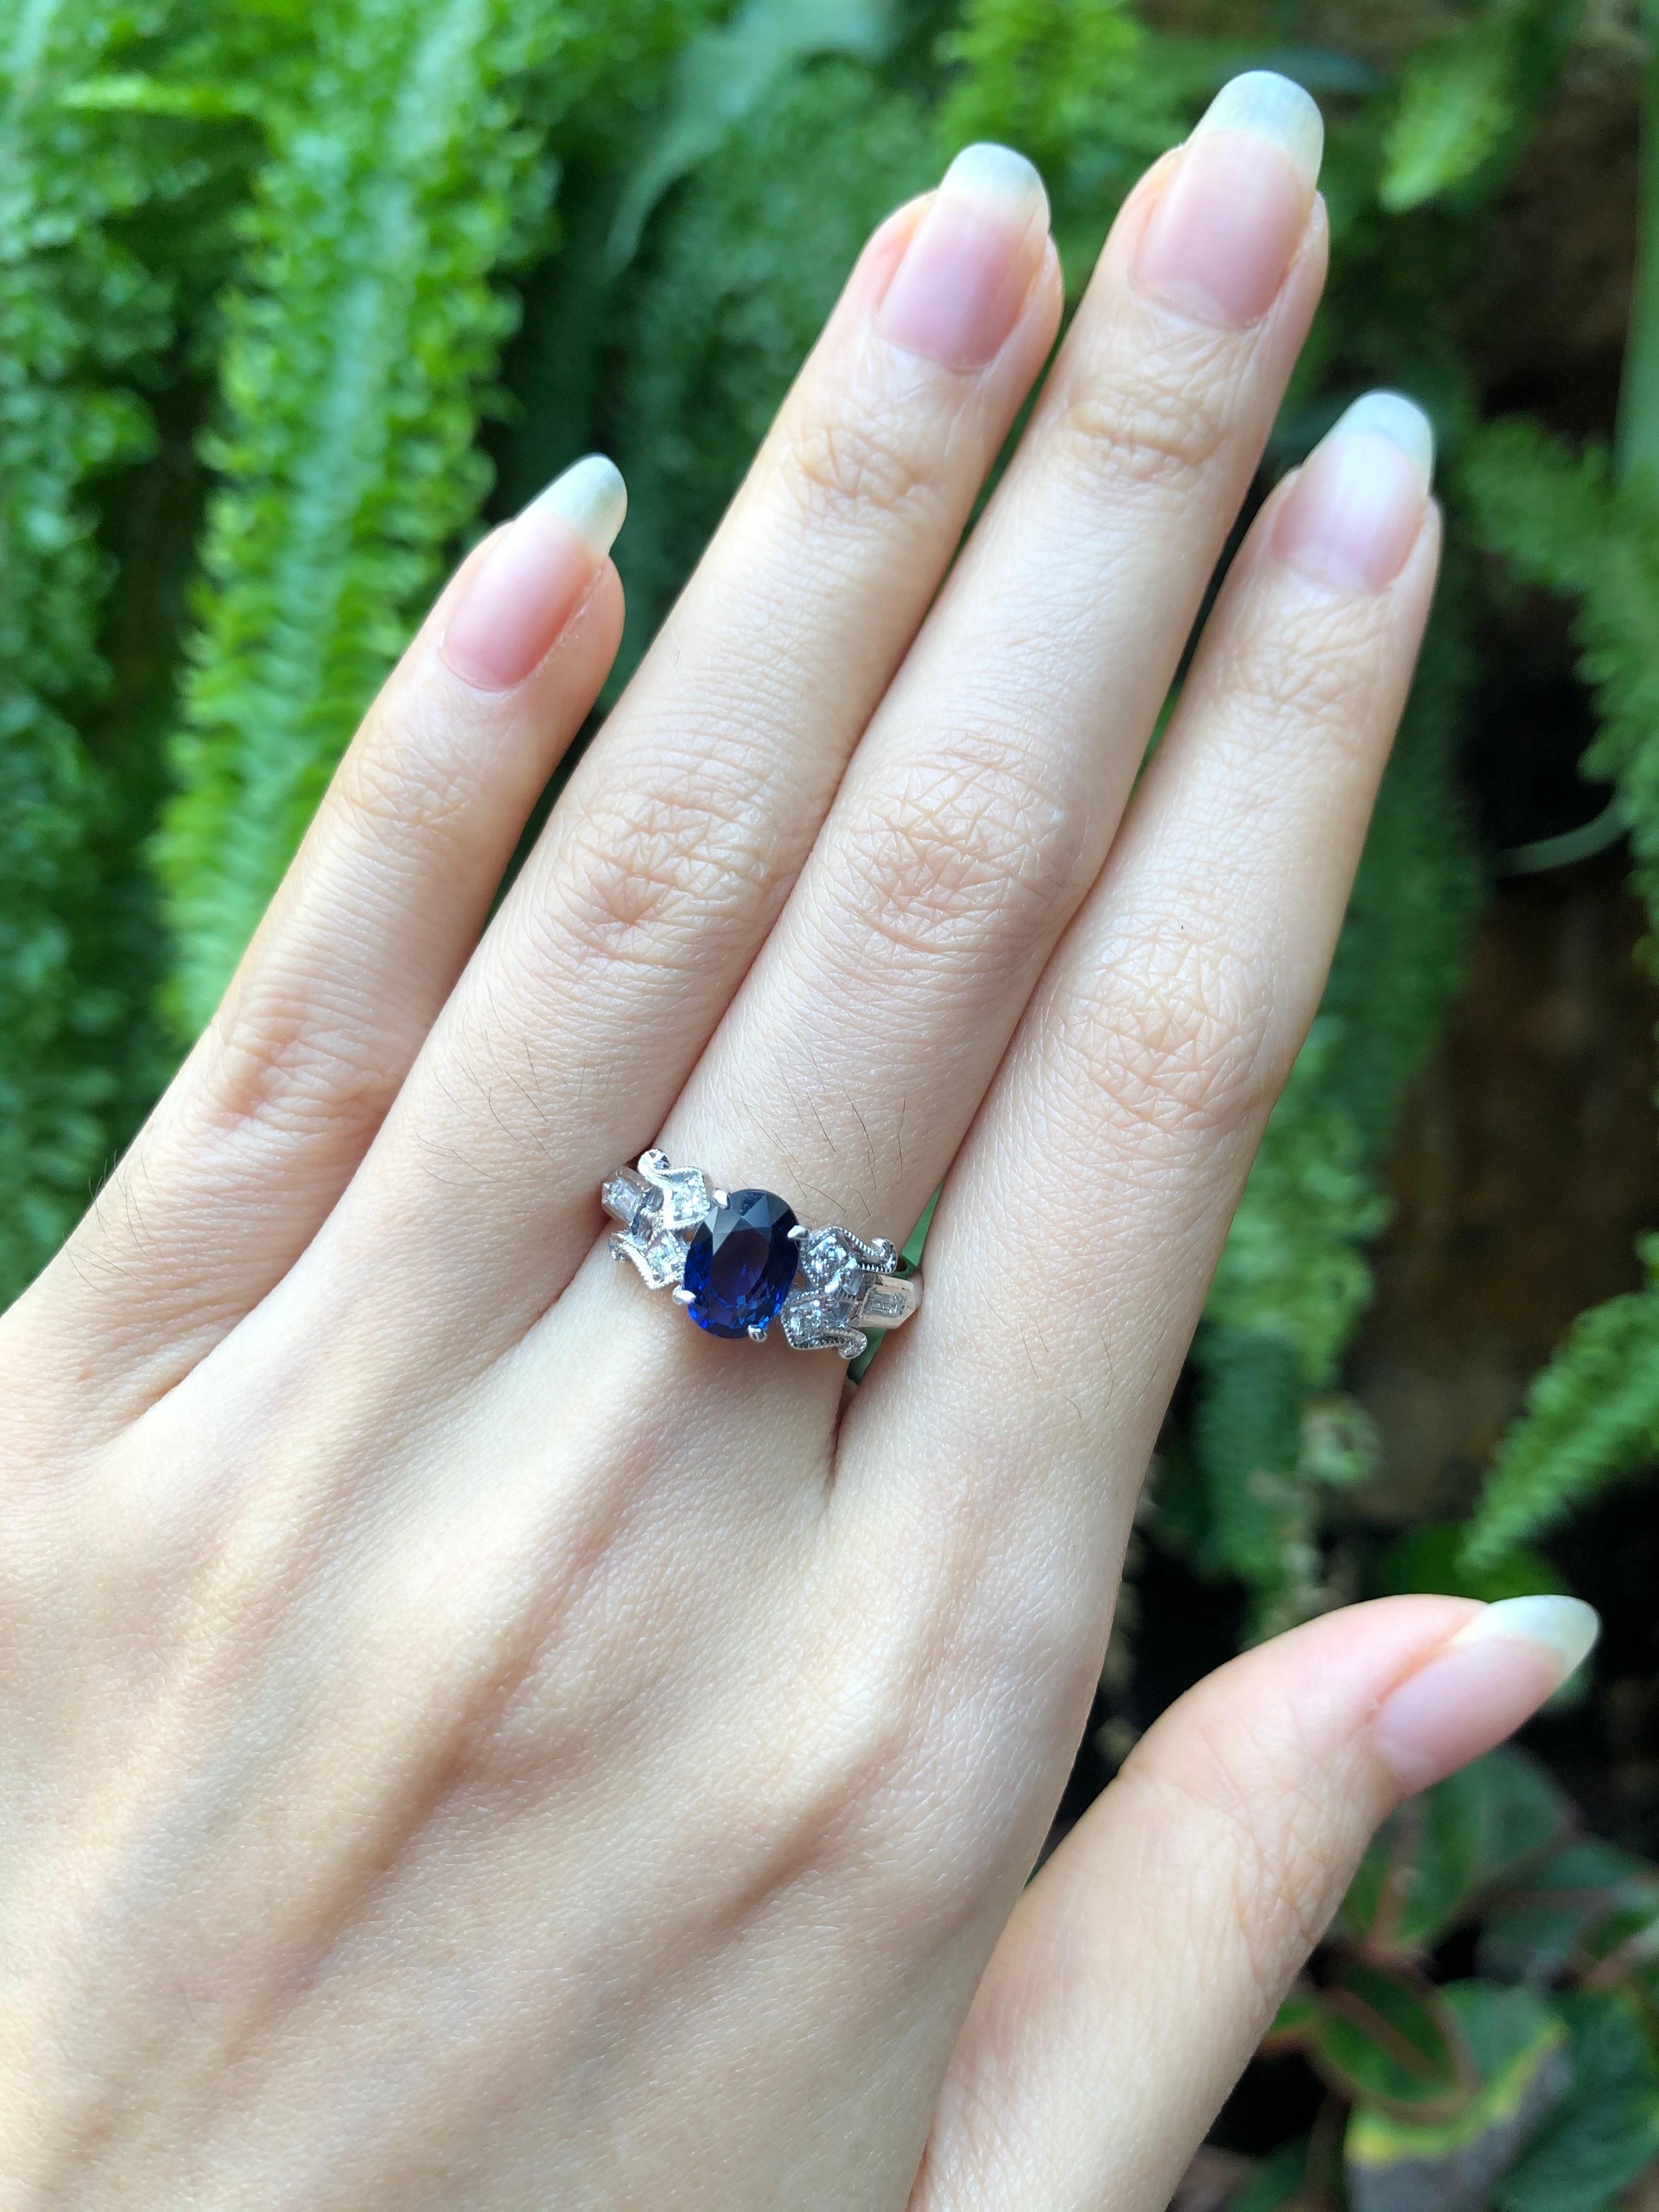 Blue Sapphire 2.01 carats with Diamond 0.18 carat Ring set in 18 Karat White Gold Settings

Width:  0.6 cm 
Length: 0.8 cm
Ring Size: 53
Total Weight: 4.32 grams

